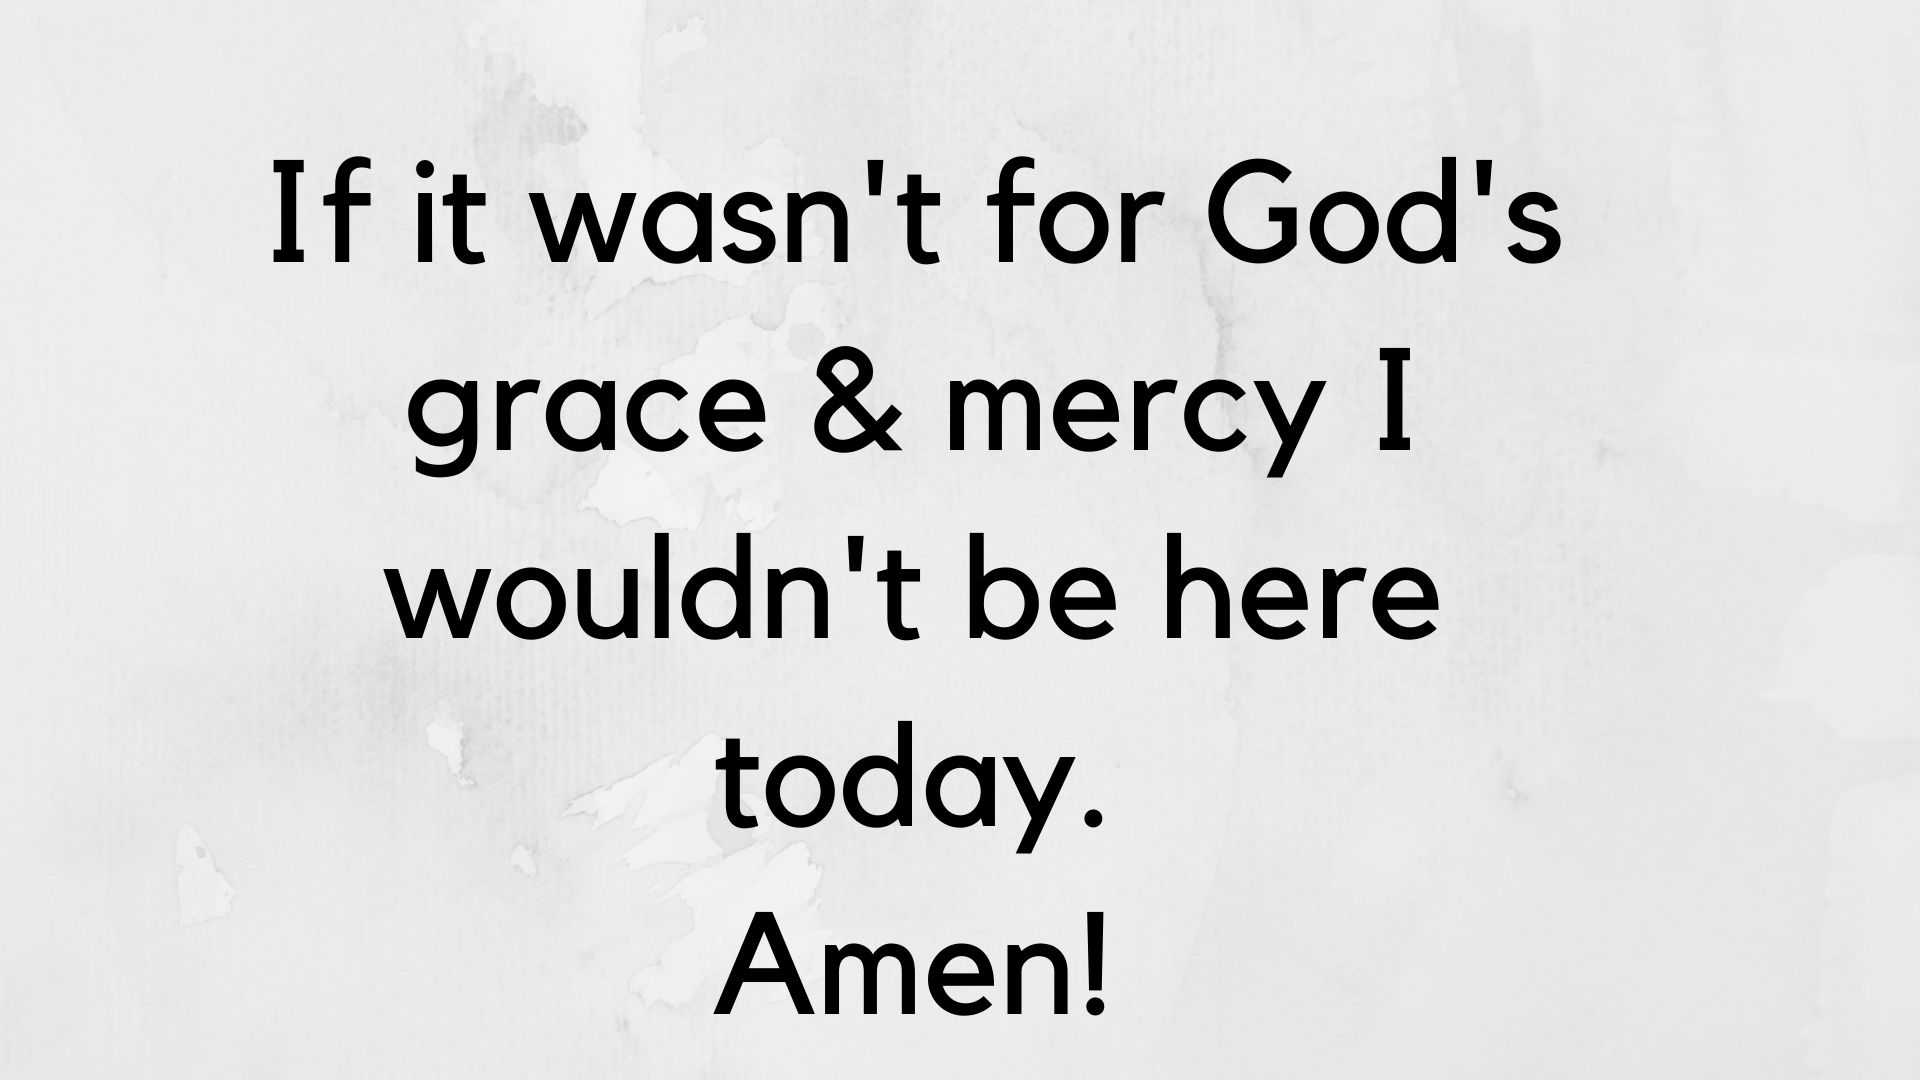 It was God’s Grace and Mercy